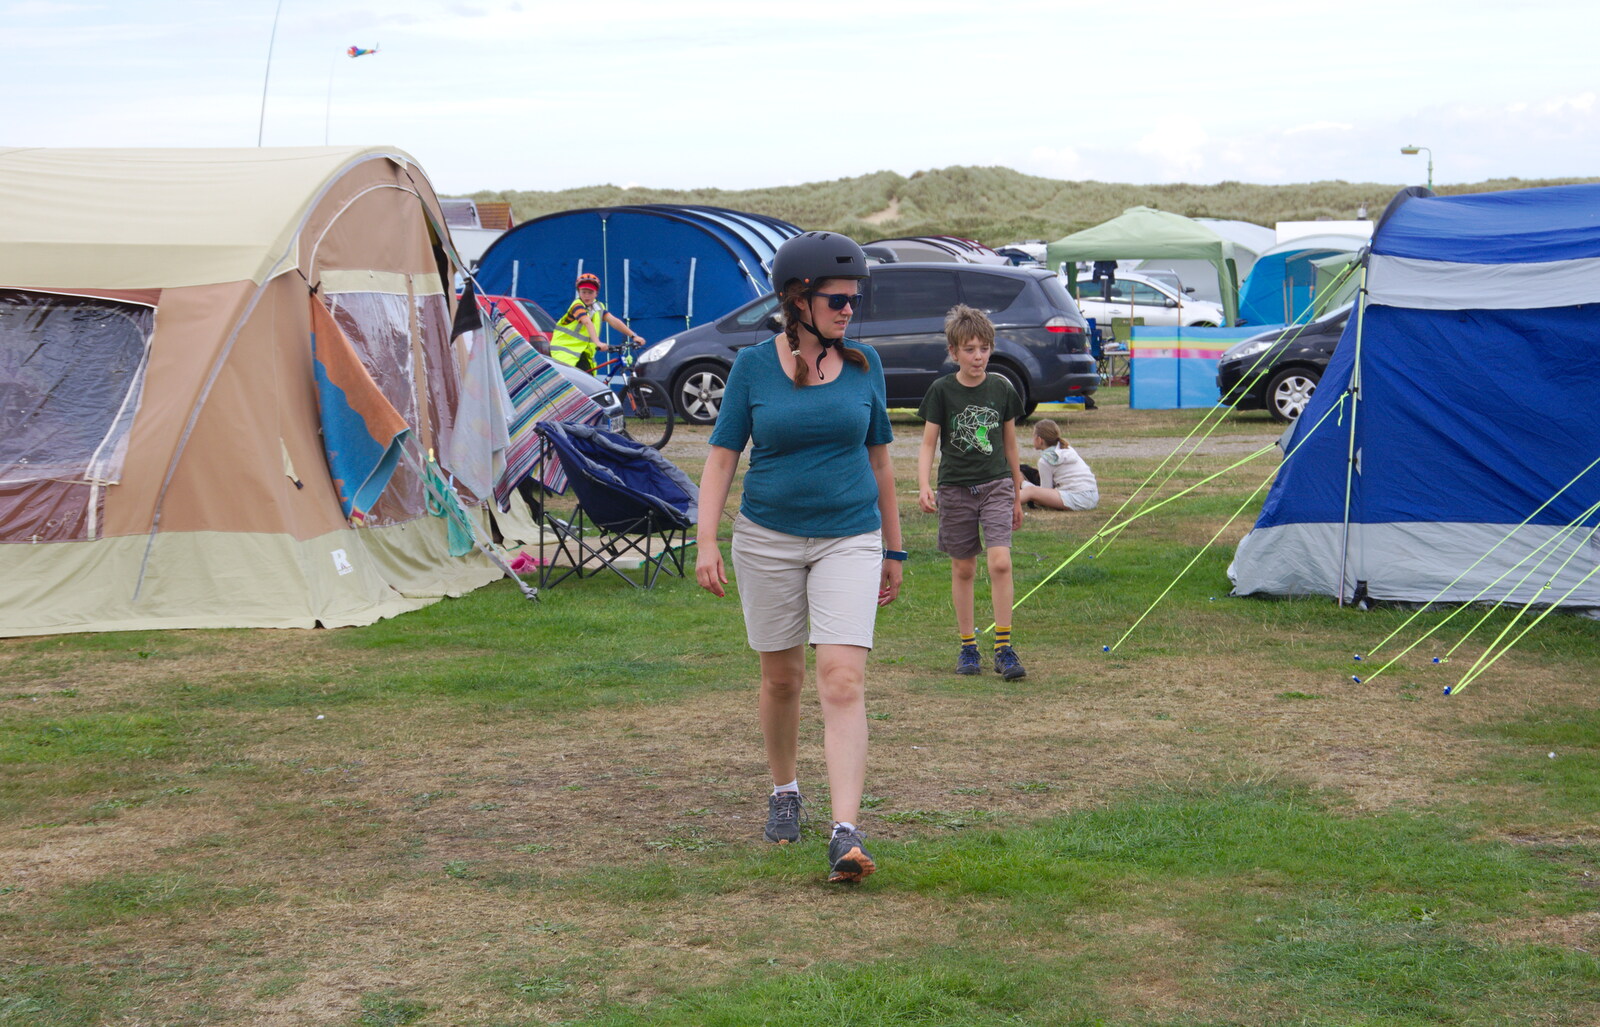 Isobel strides over with bike helmet on from Waxham Sands and the Nelson Head Beer Festival, Horsey, Norfolk - 31st August 2019